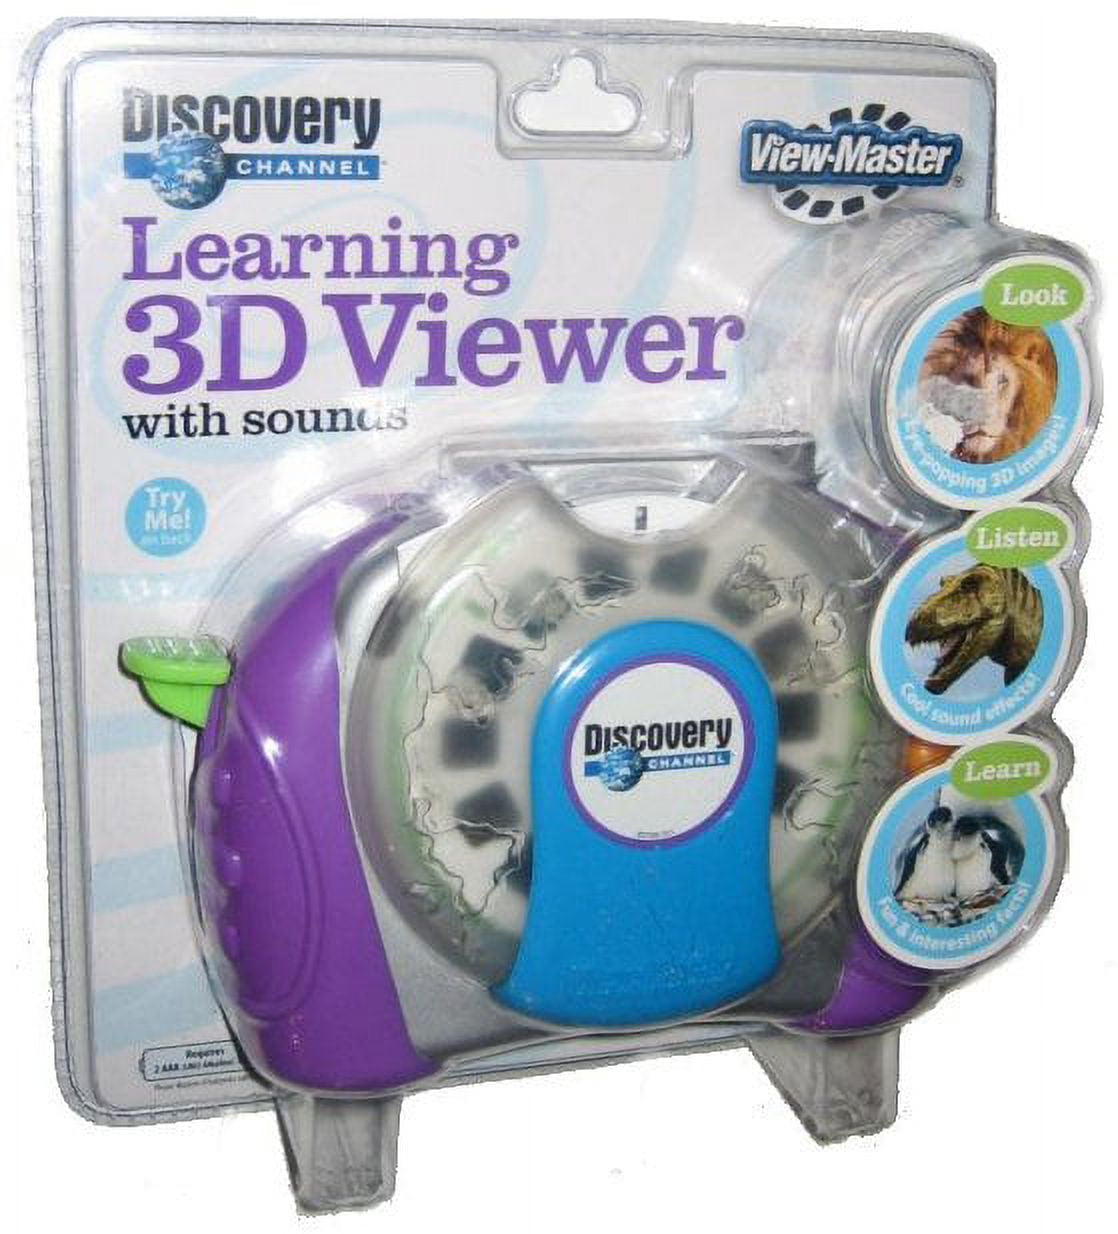 Fisher-Price View-Master Discovery Channel 3D Learning Viewer w/ Sounds Toy  